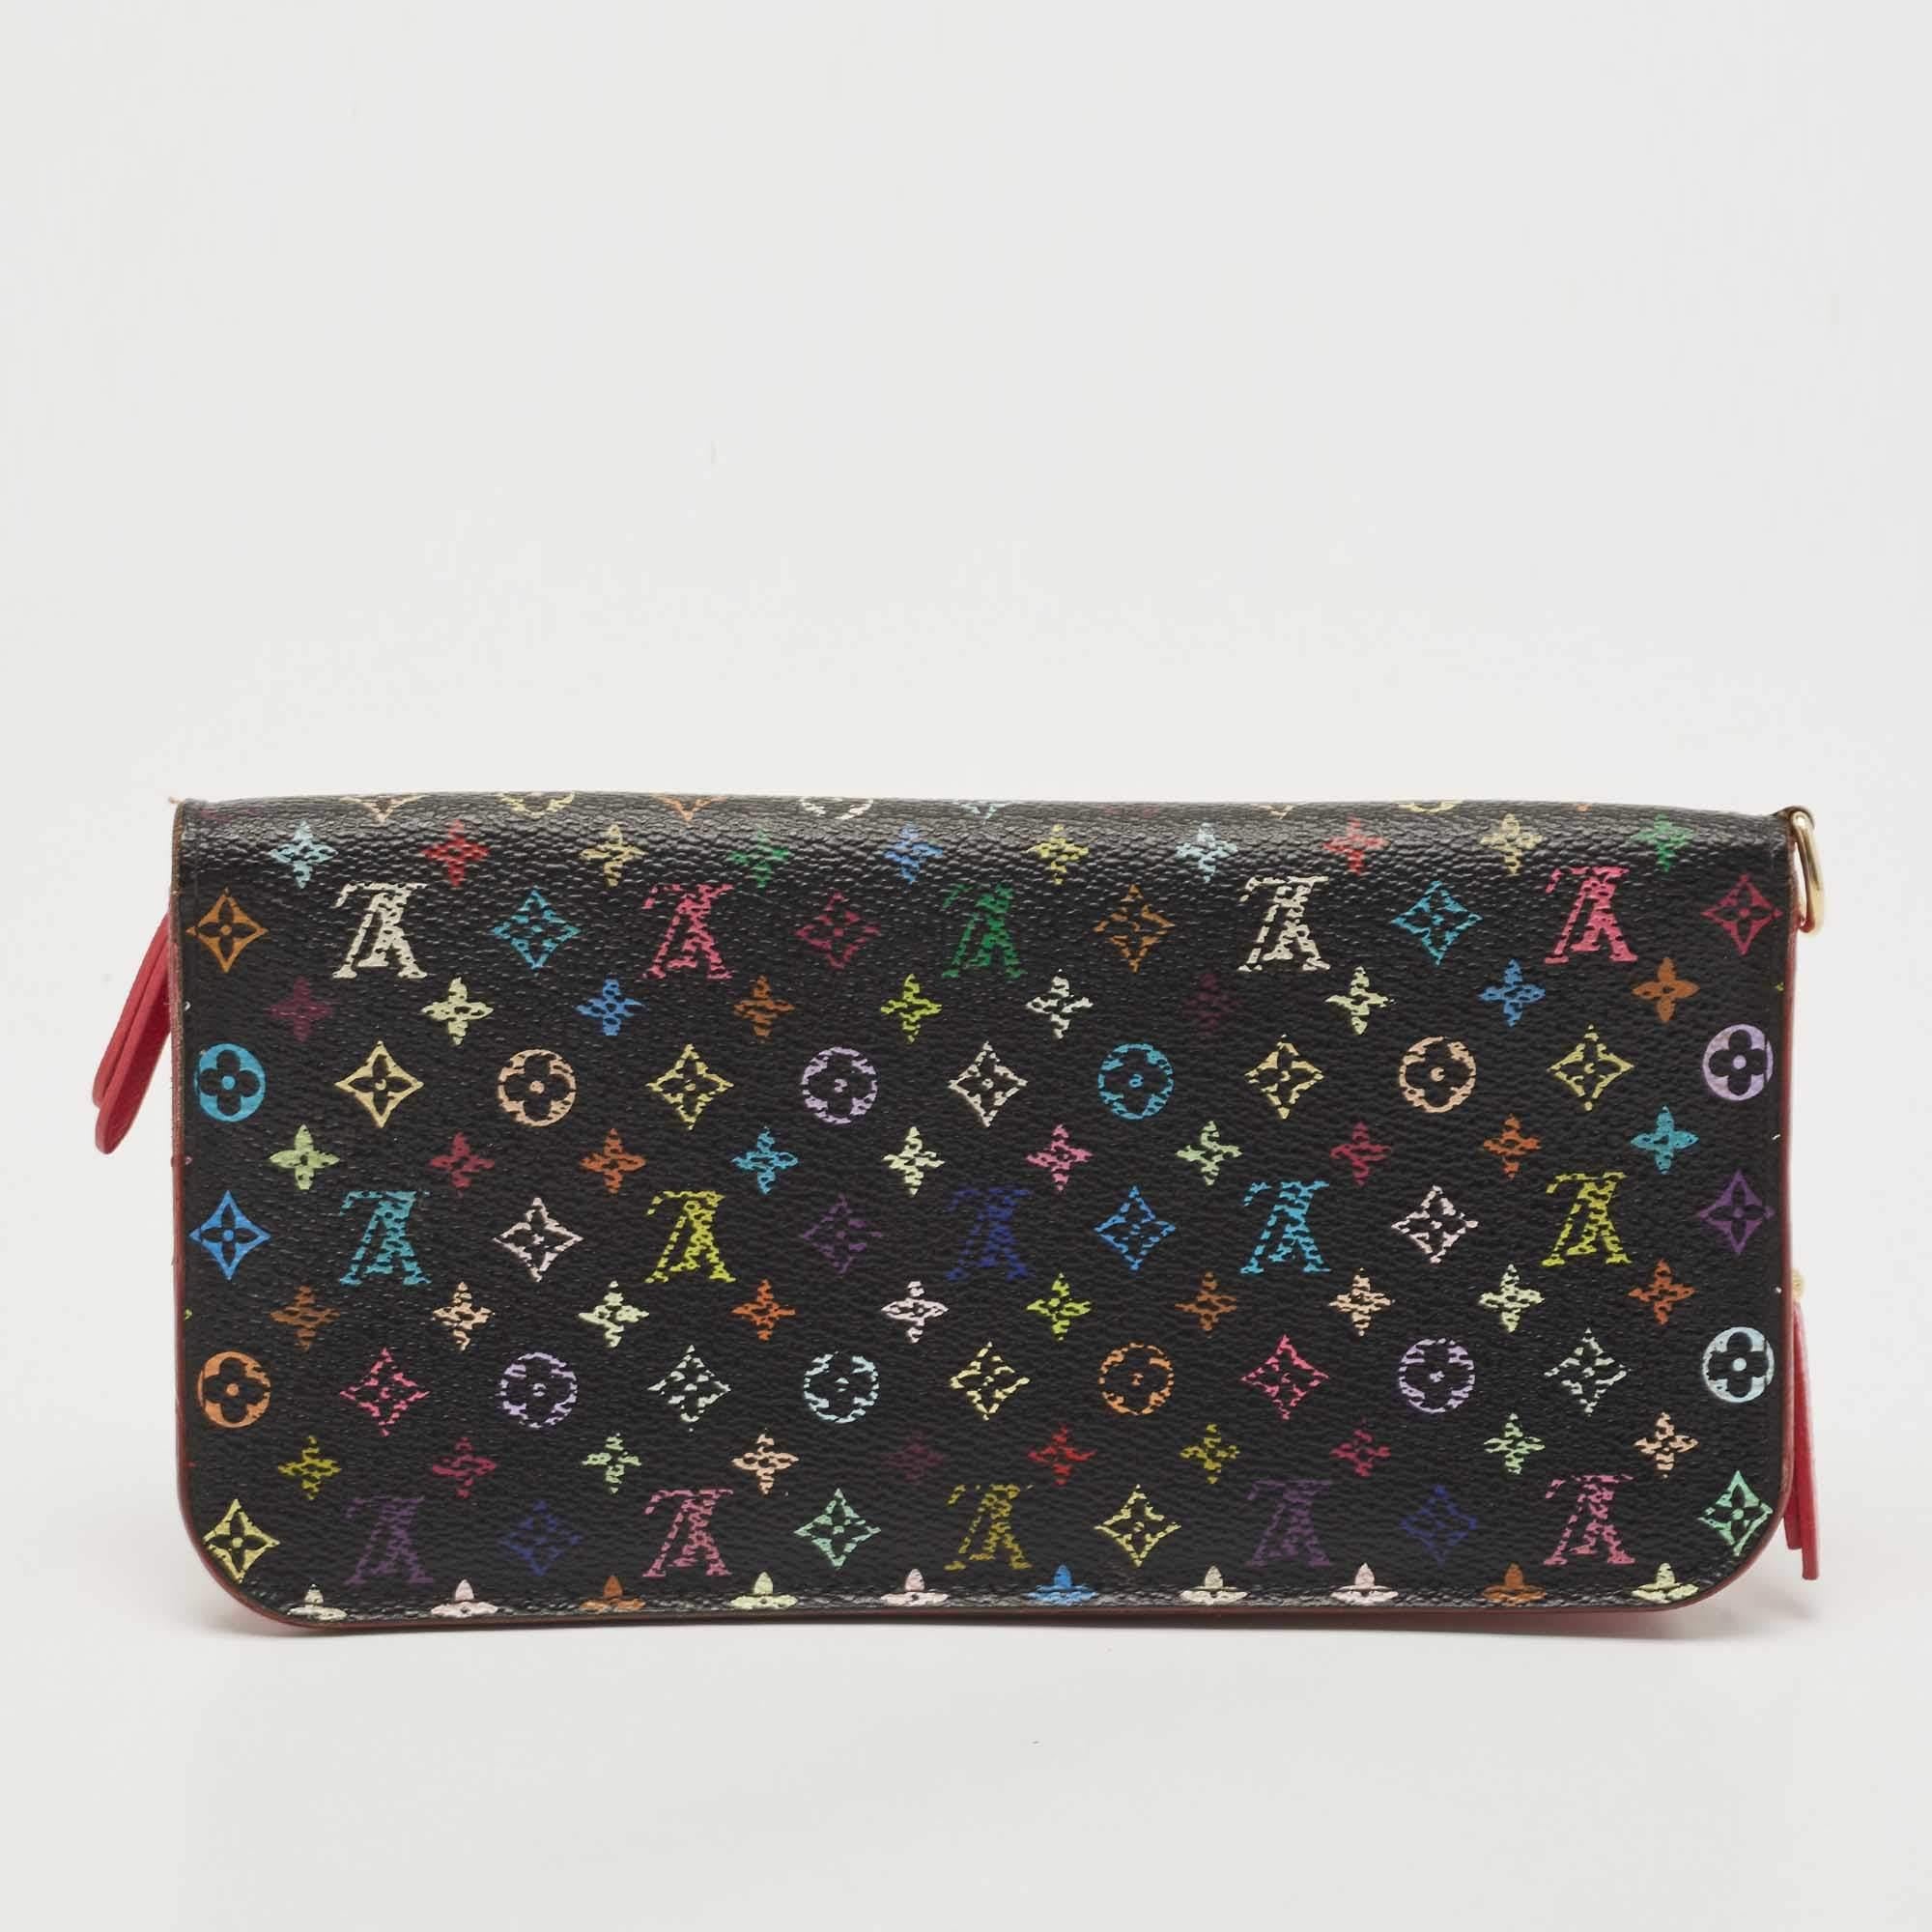 This Insolite wallet from the house of Louis Vuitton is created to offer functionality and style. It is made from Monogram Multicolore canvas on the exterior. It has a neat leather-lined interior and gold-tone hardware. This LV wallet is great for